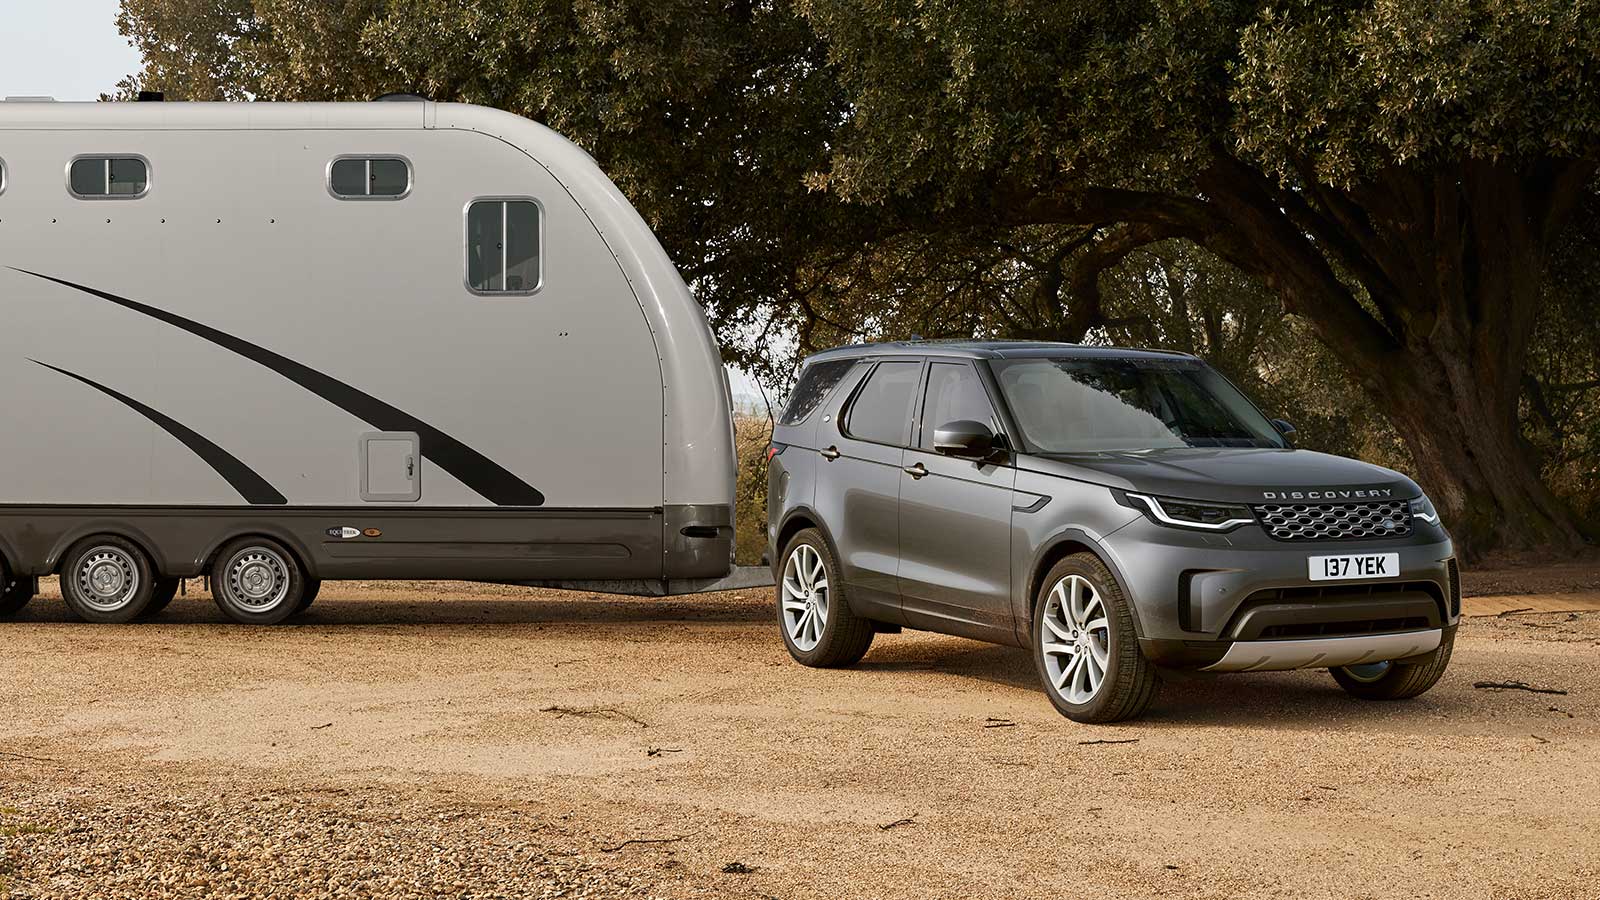 Land Rover Discovery exterior pulling a horse box